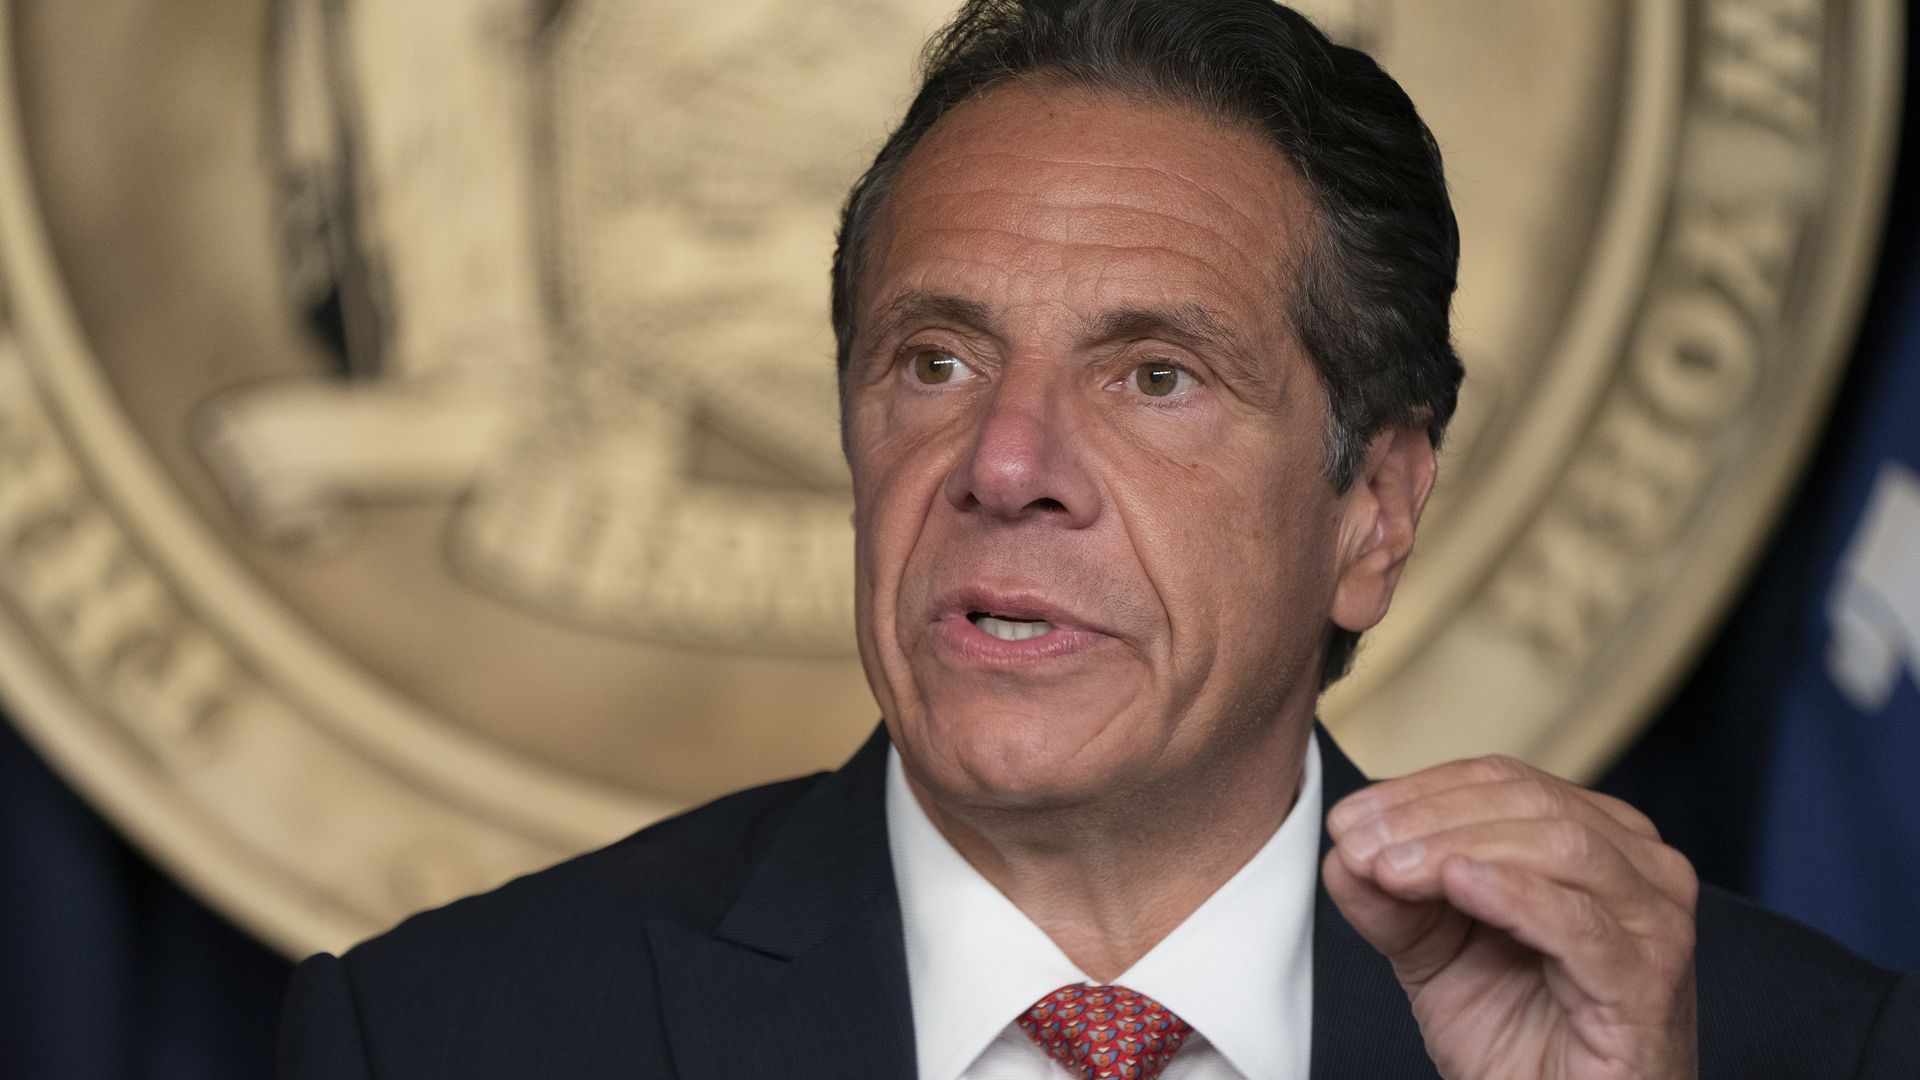 Photo of Andrew Cuomo speaking with one hand raised